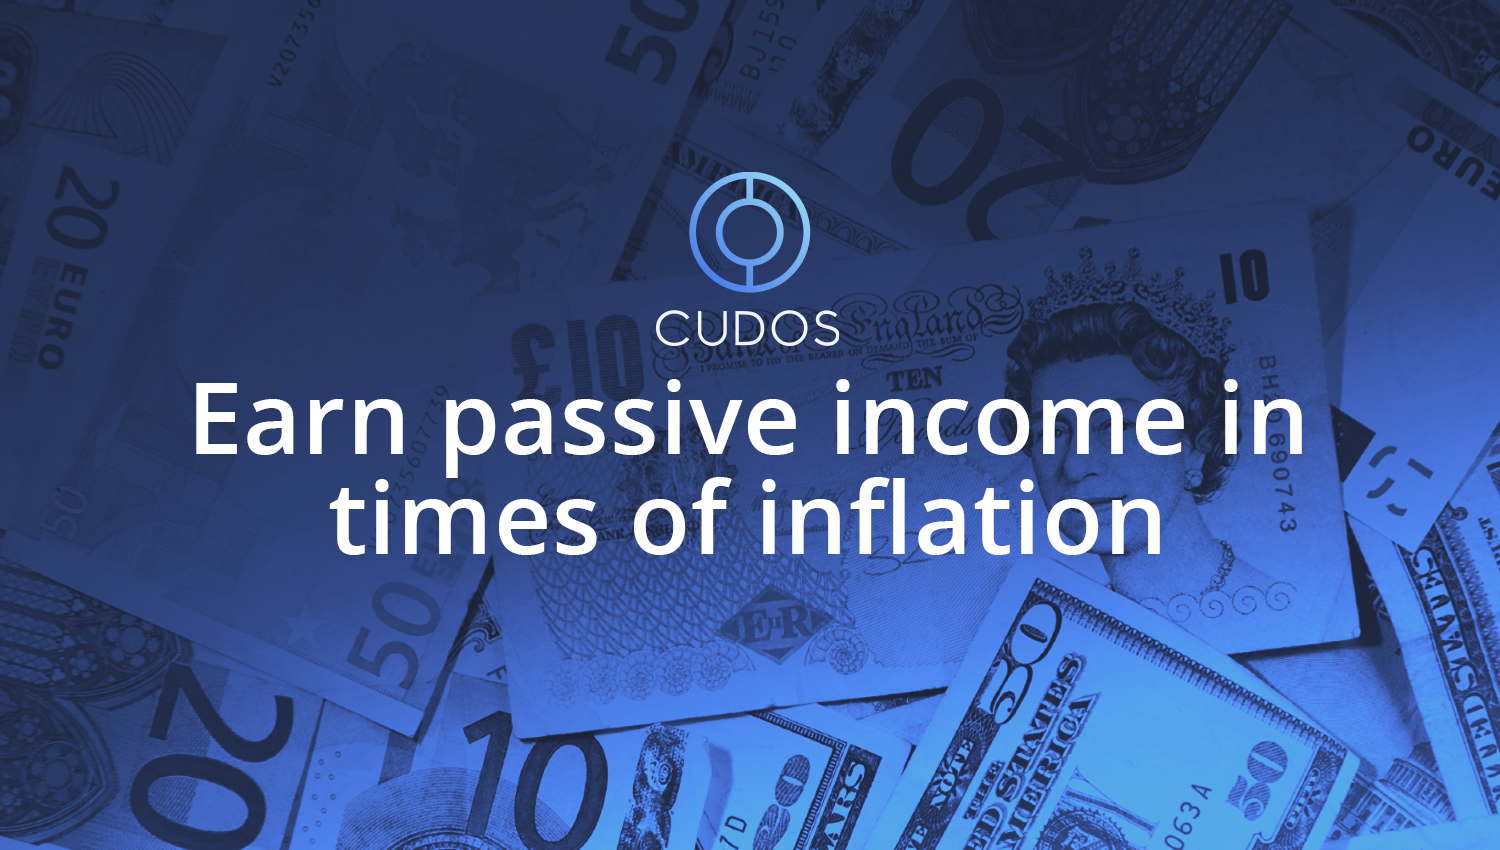 Earn passive income in times of inflation from your hardware